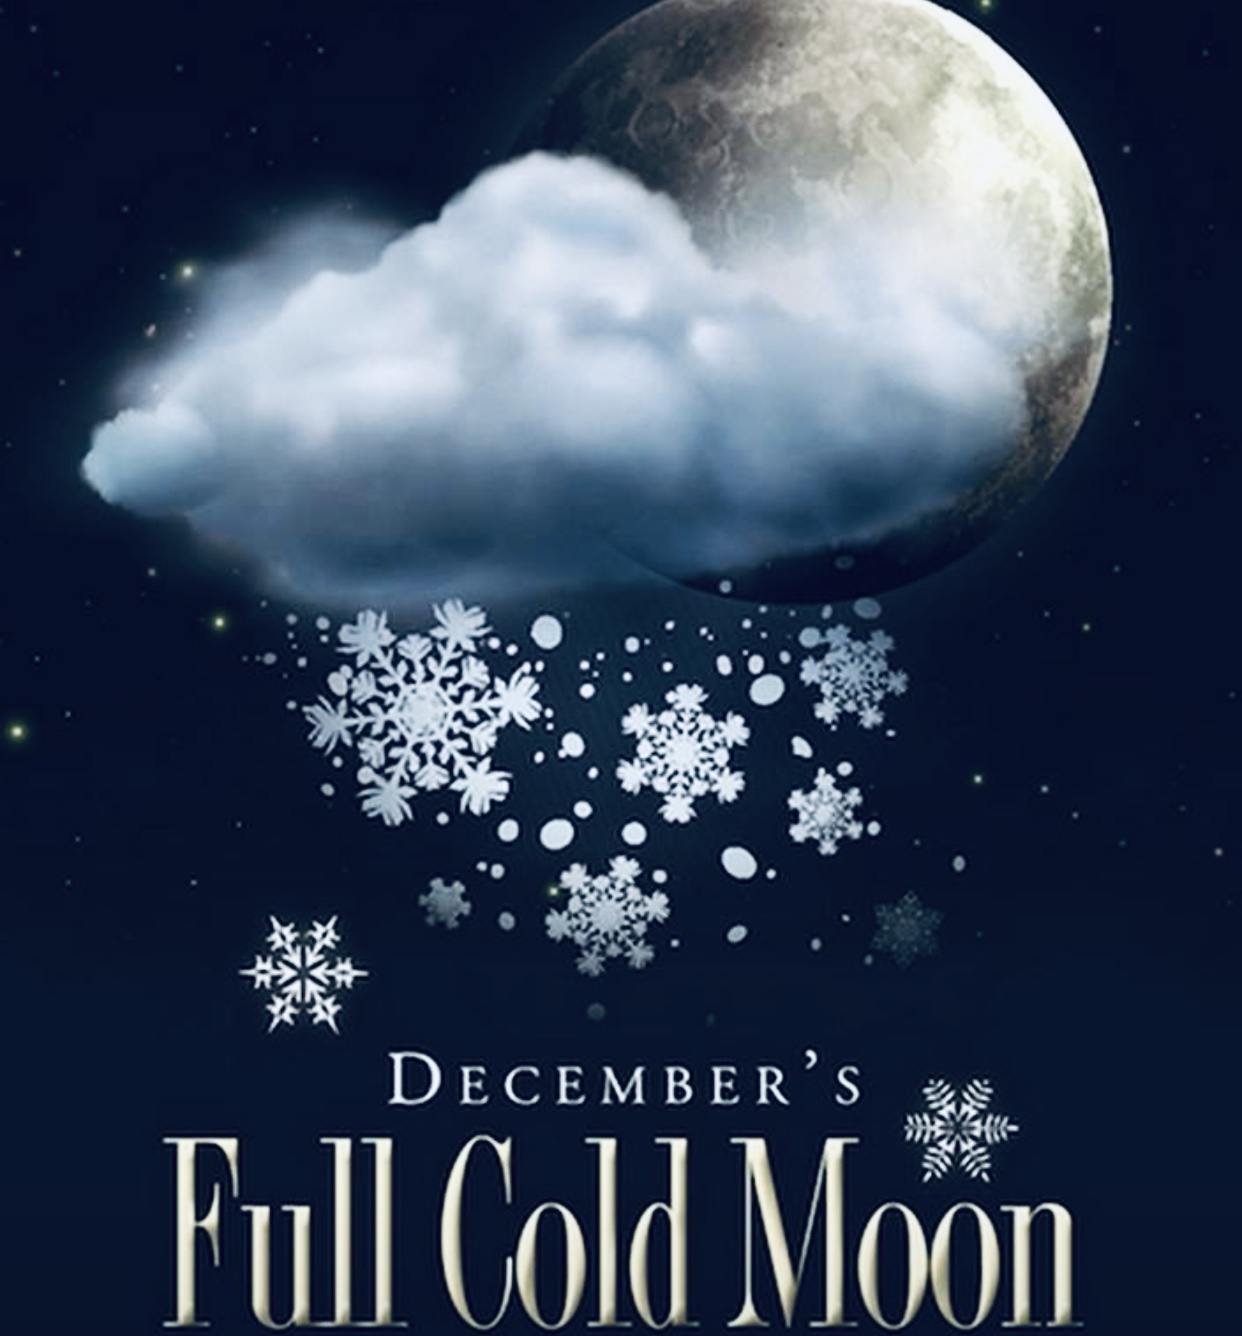 Cold Moon. December Moon. Cold Moon группа. The Moon on December. Cold december